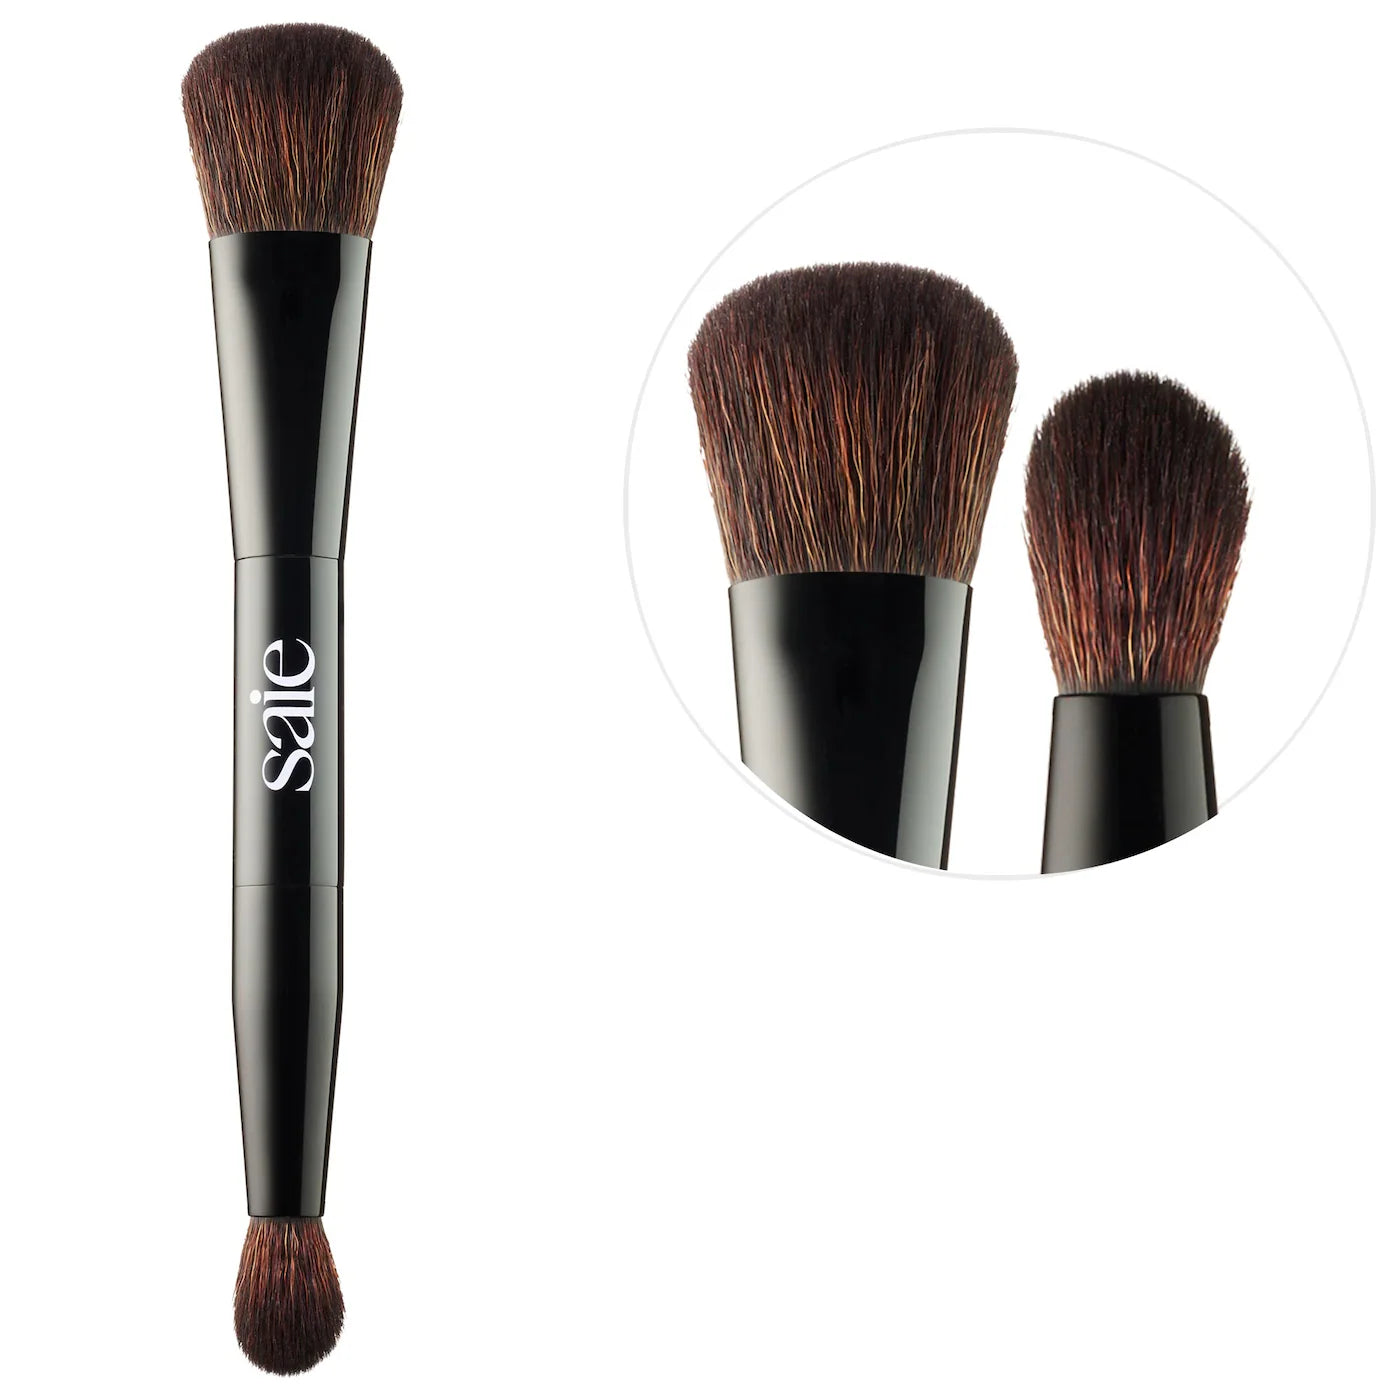 The Double Ended Sculpting Brush